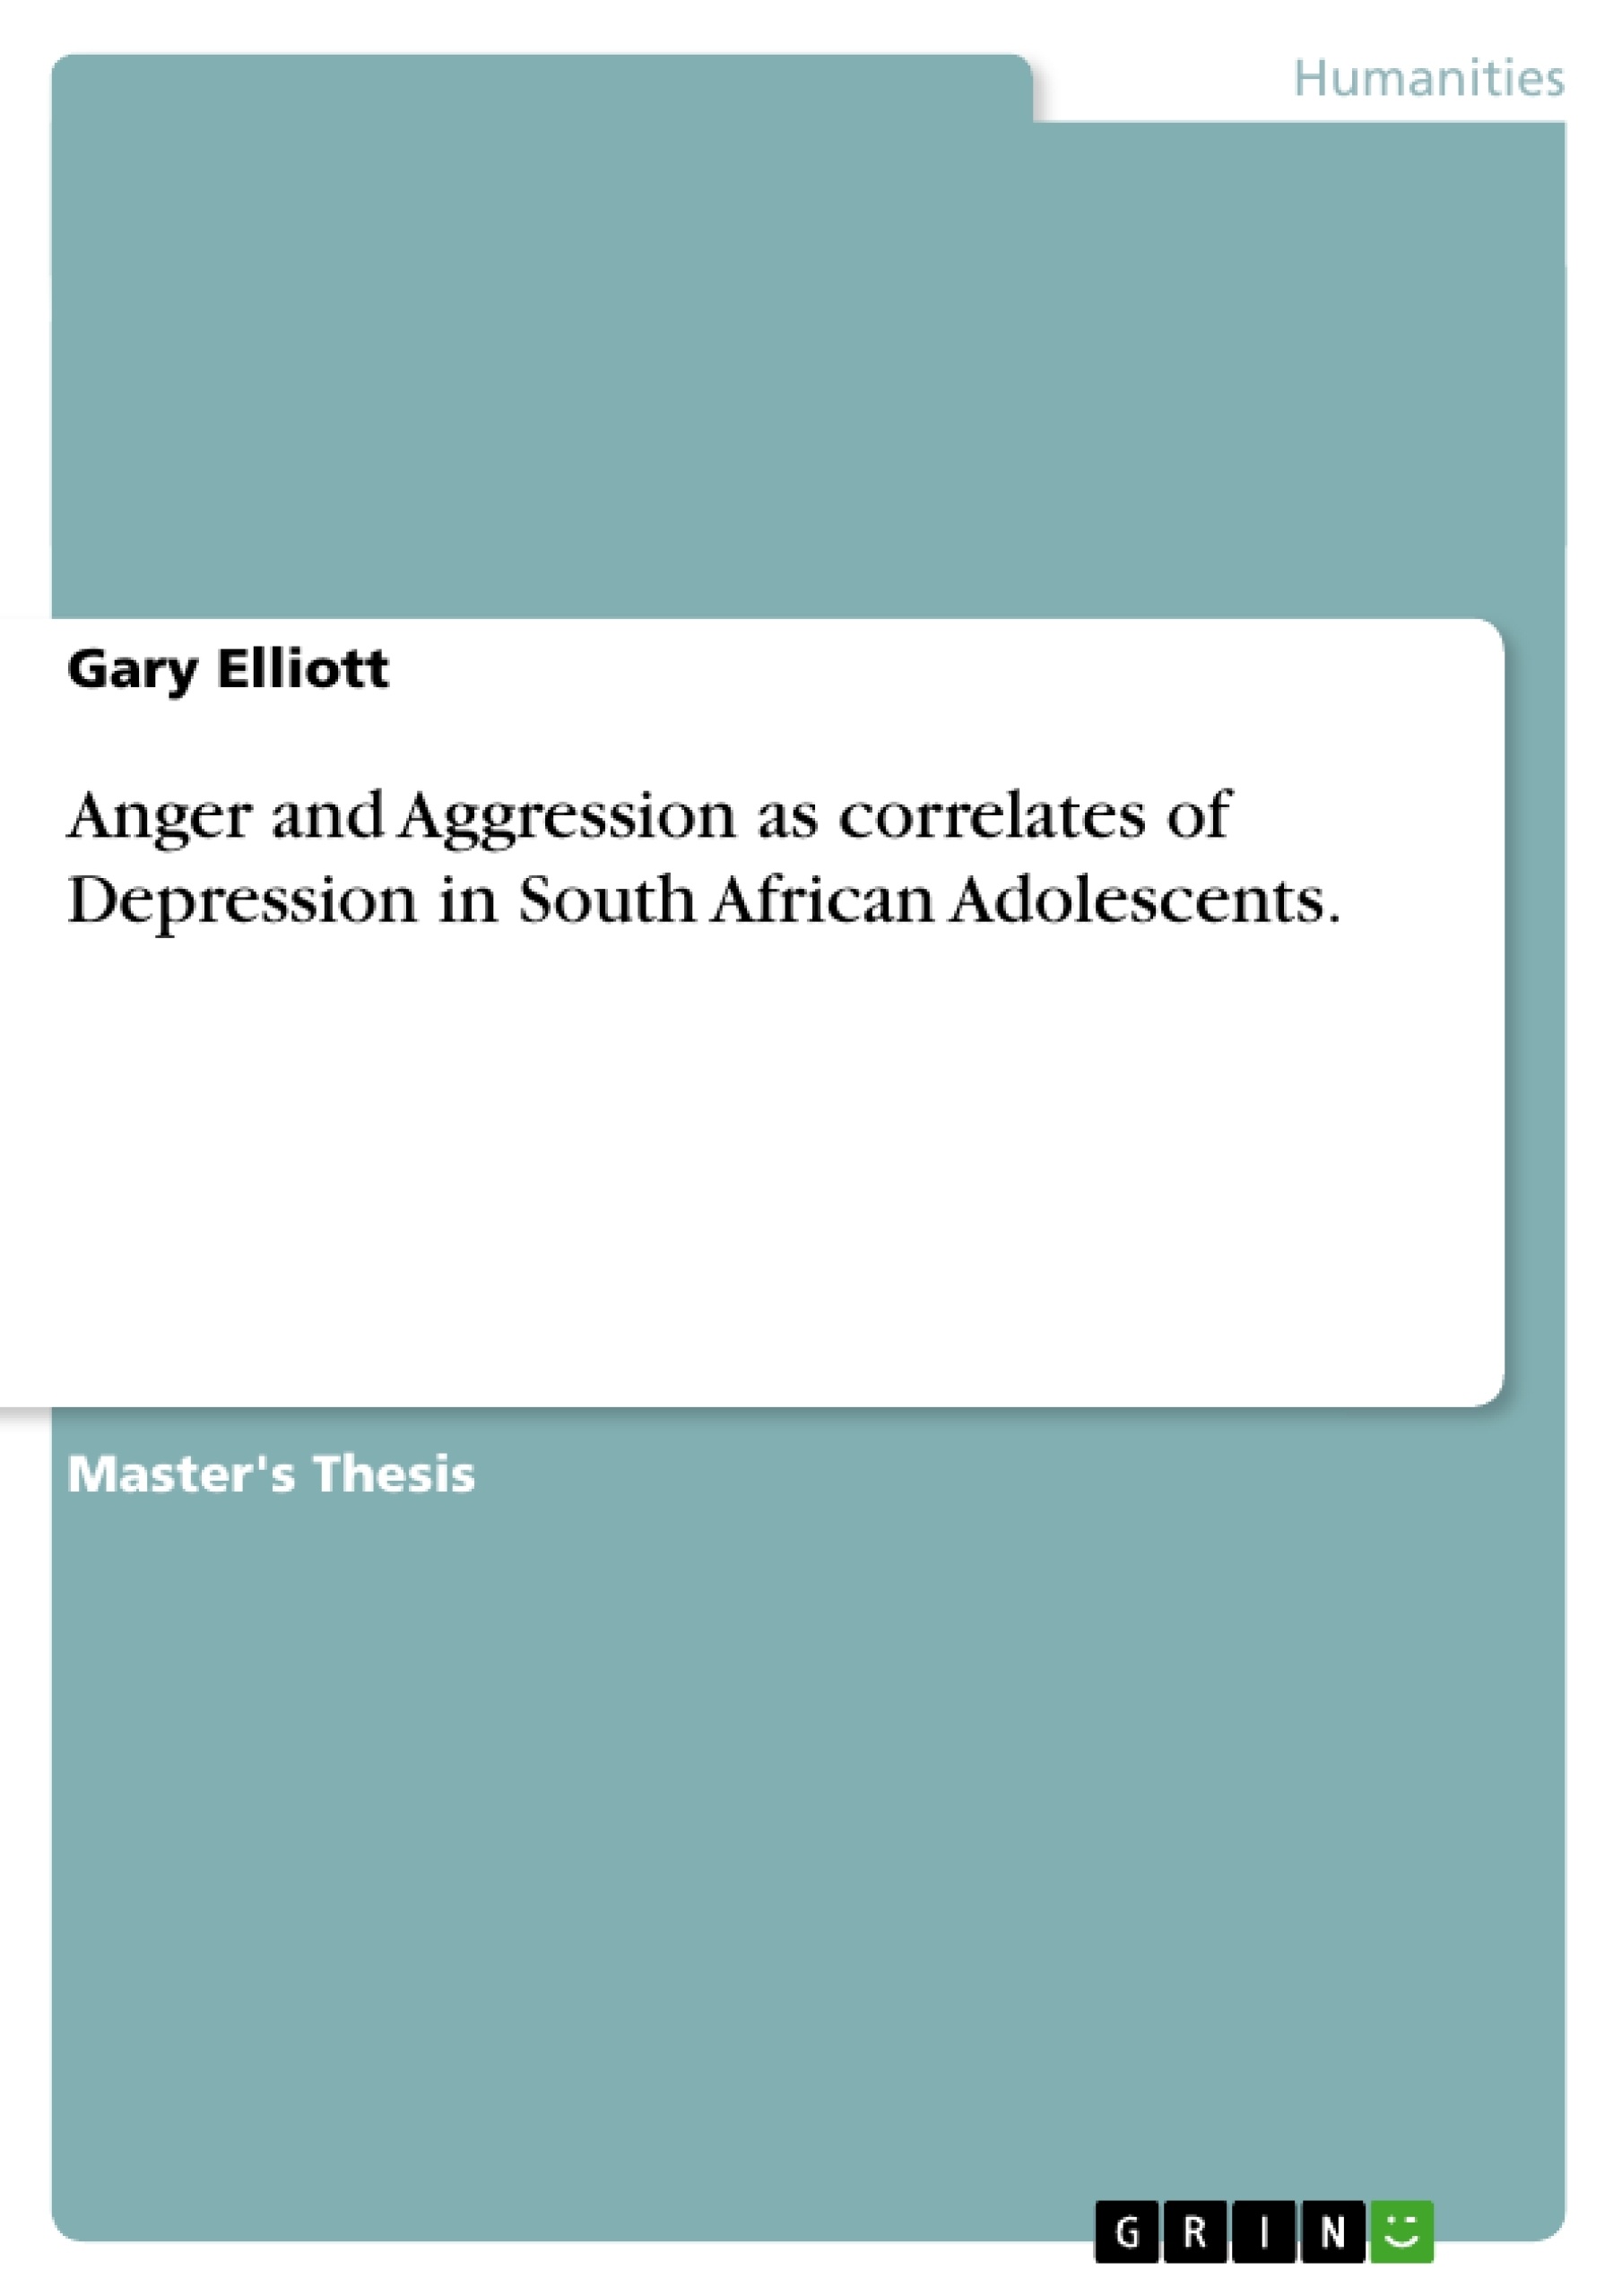 Title: Anger and Aggression as correlates of Depression in South African Adolescents.